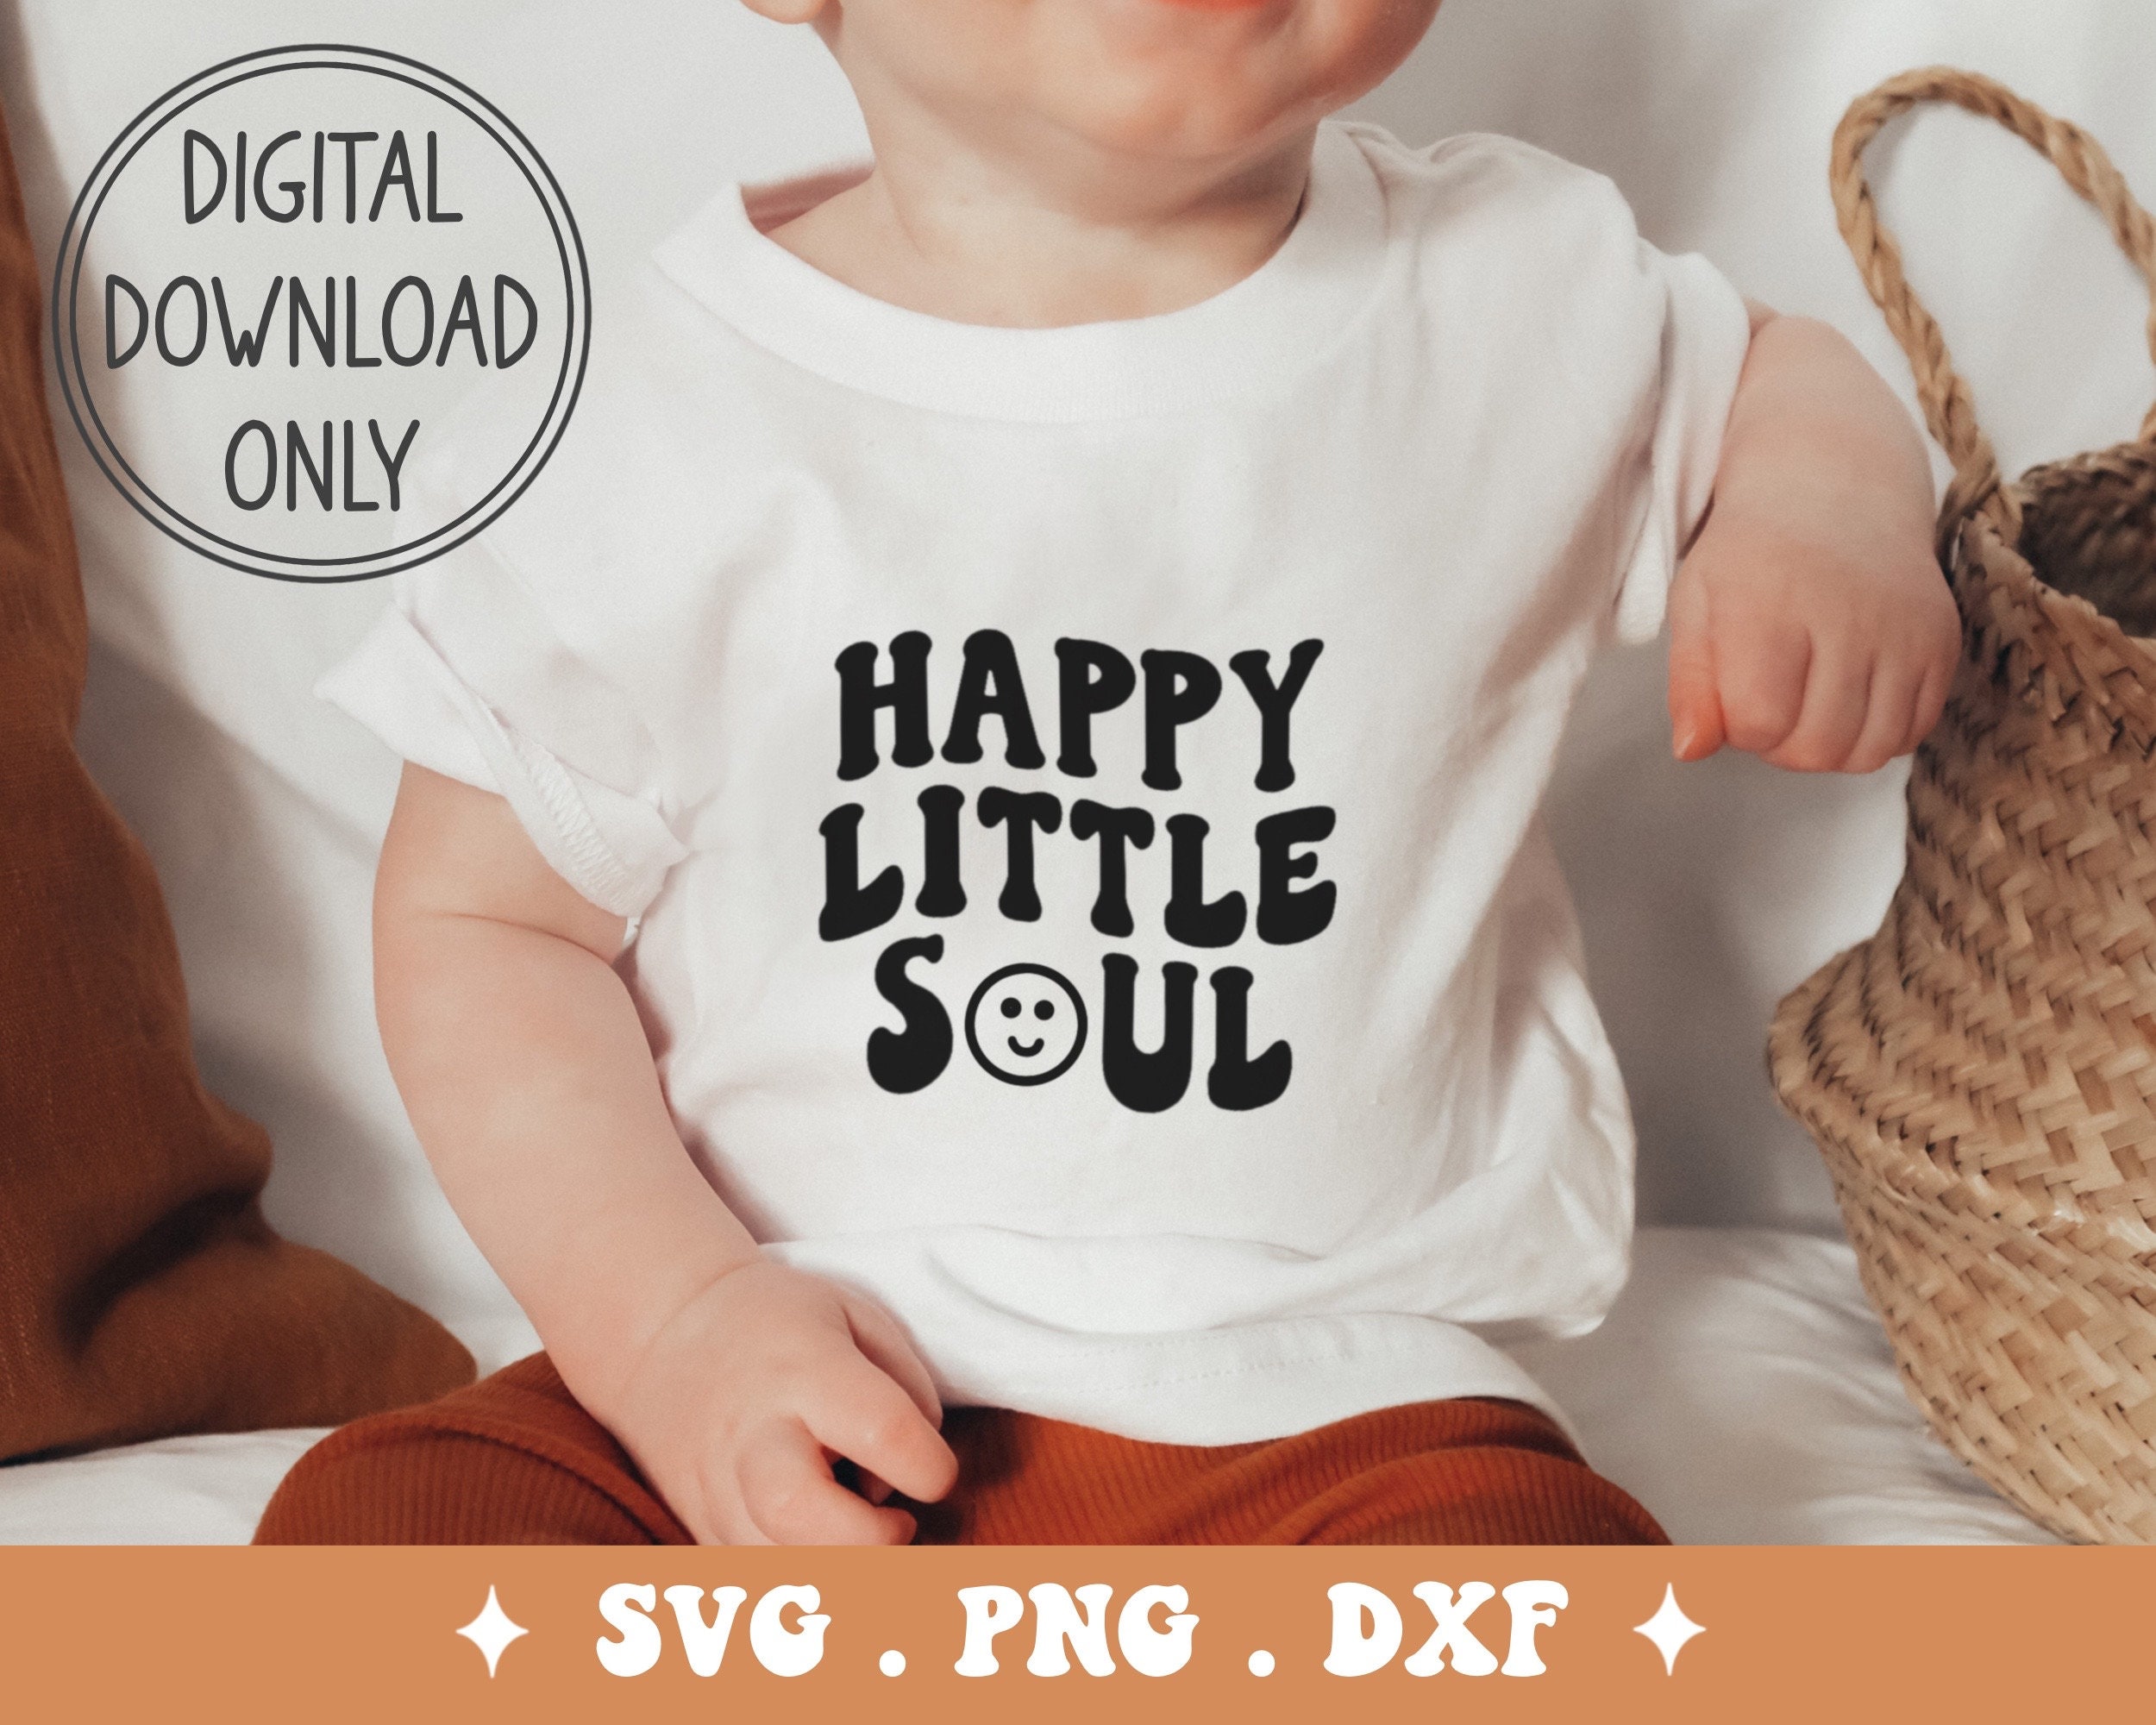 DXF Digital File PNG Happiness SVG